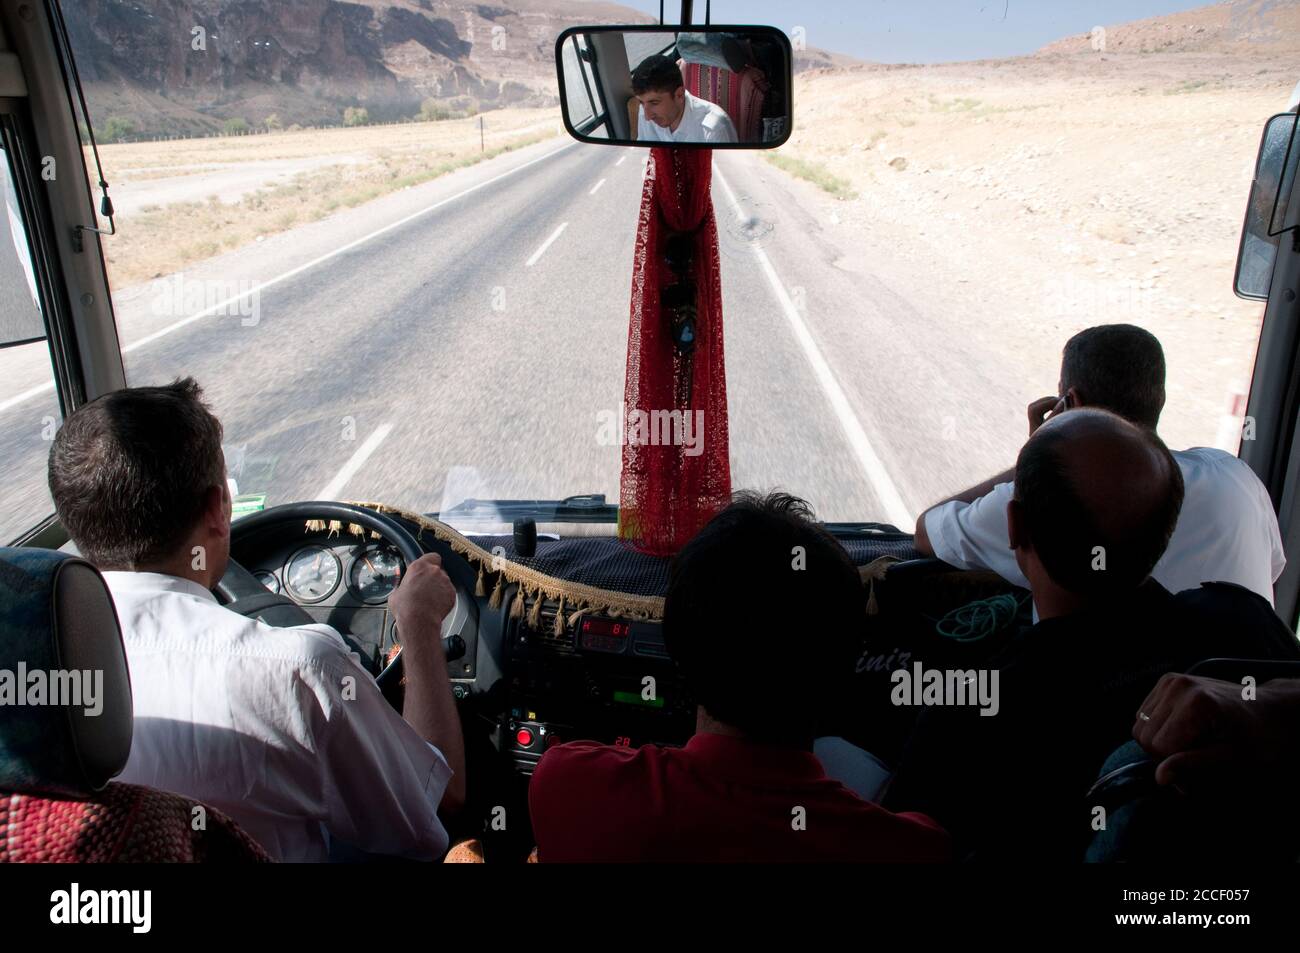 A driver and passengers at the front of an intercity bus on a rural highway near the city of Van, in the eastern Anatolia region, southeastern Turkey. Stock Photo